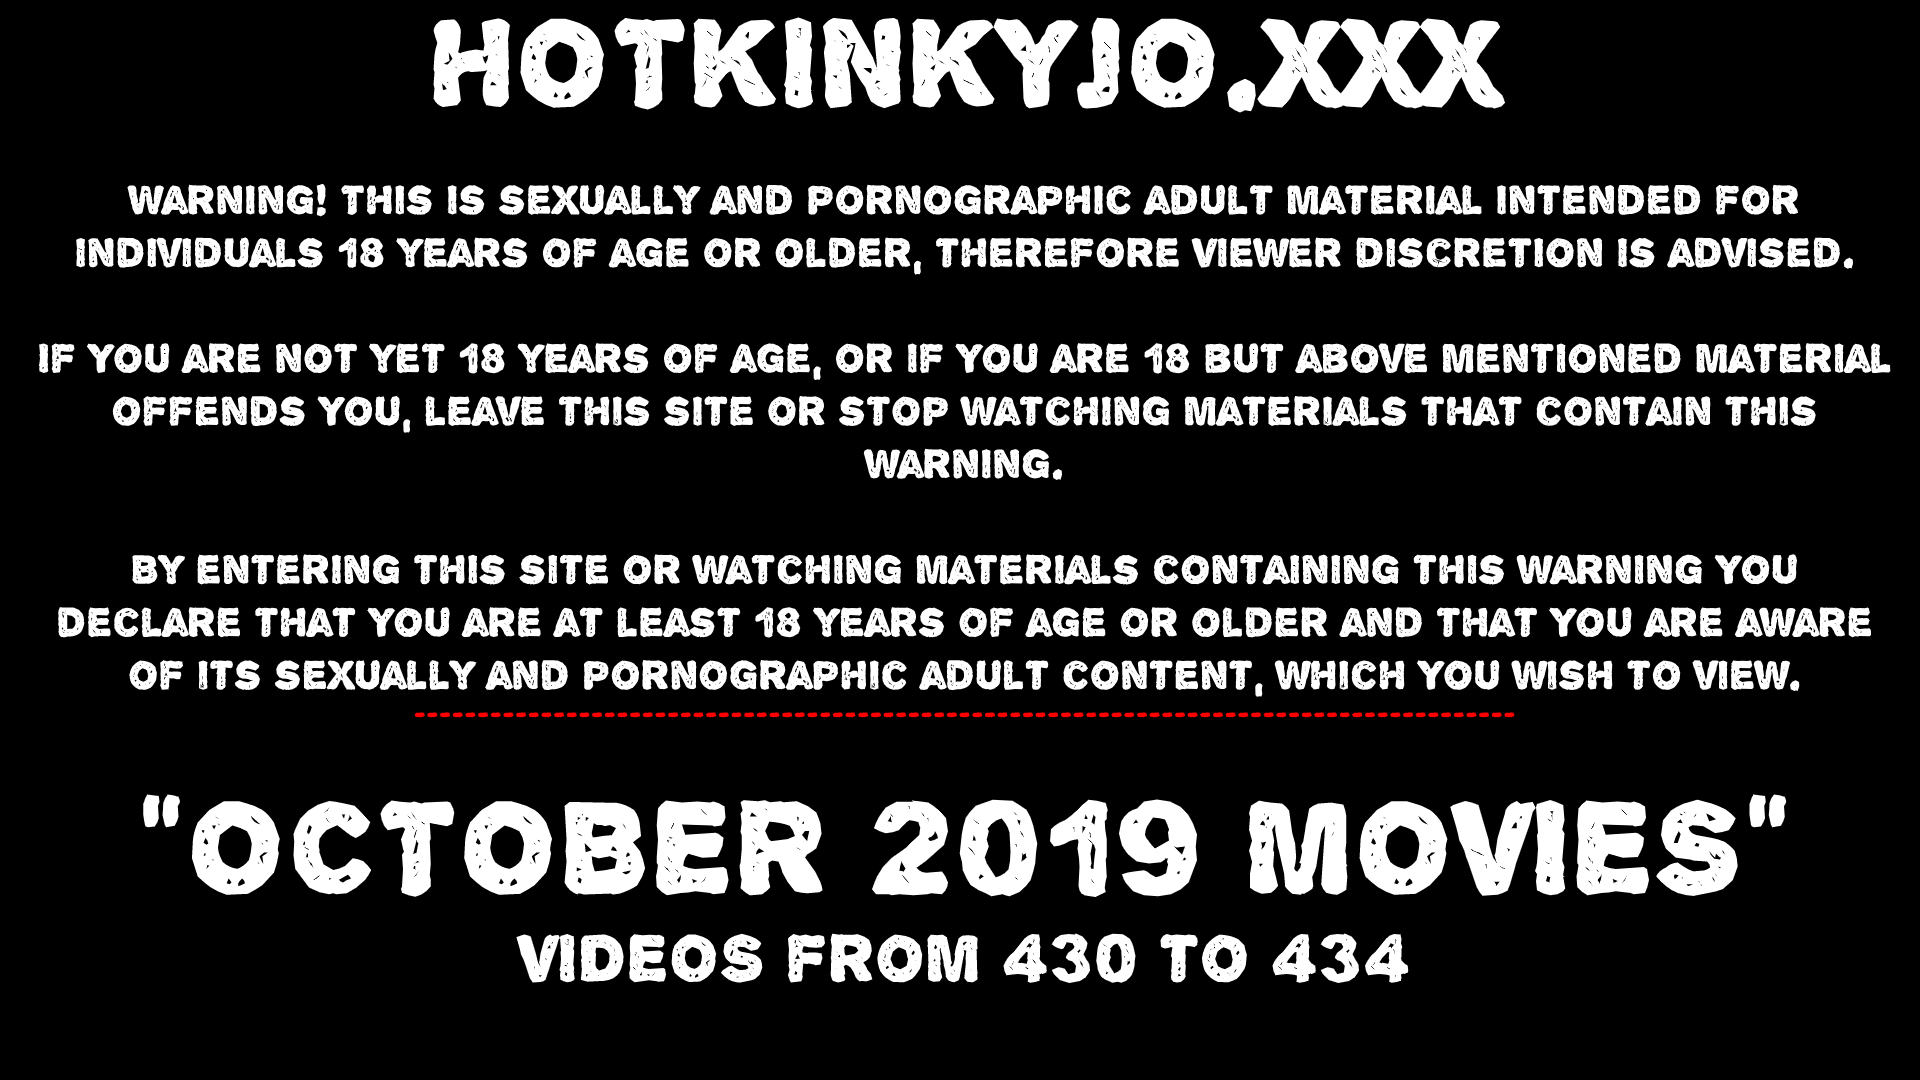 OCTOBER 2019 News at HOTKINKYJO site: double anal fisting, prolapse, public